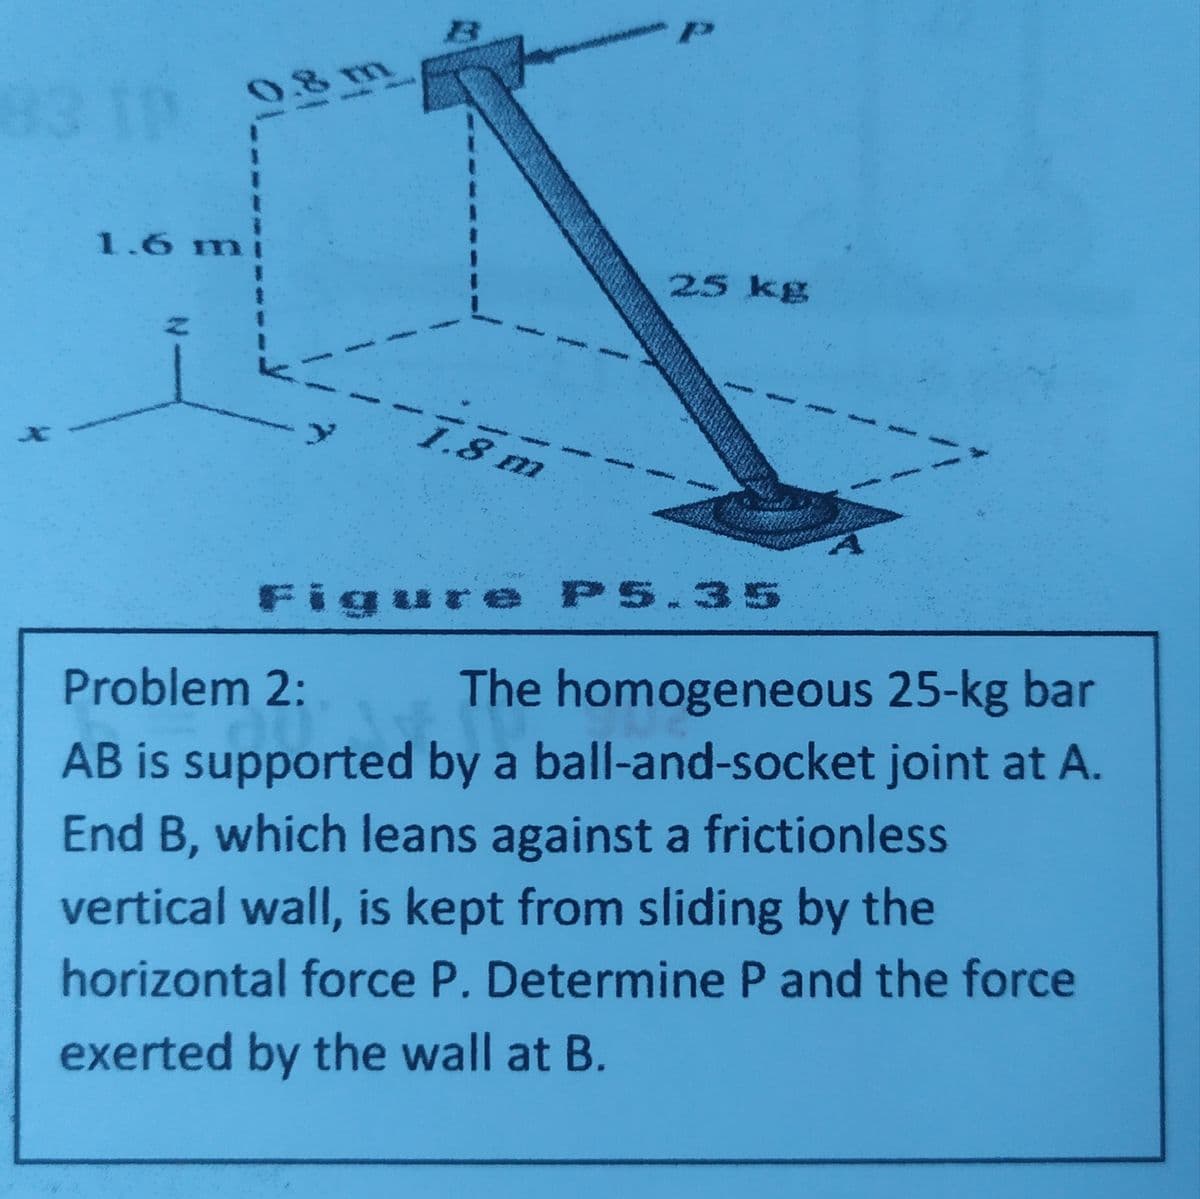 0.8 m
83 19
1.6 mi
|集
25 kg
.8 m
Figure P5.35
Problem 2:
The homogeneous 25-kg bar
AB is supported by a ball-and-socket joint at A.
End B, which leans against a frictionless
vertical wall, is kept from sliding by the
horizontal force P. Determine P and the force
exerted by the wall at B.
1/ A
